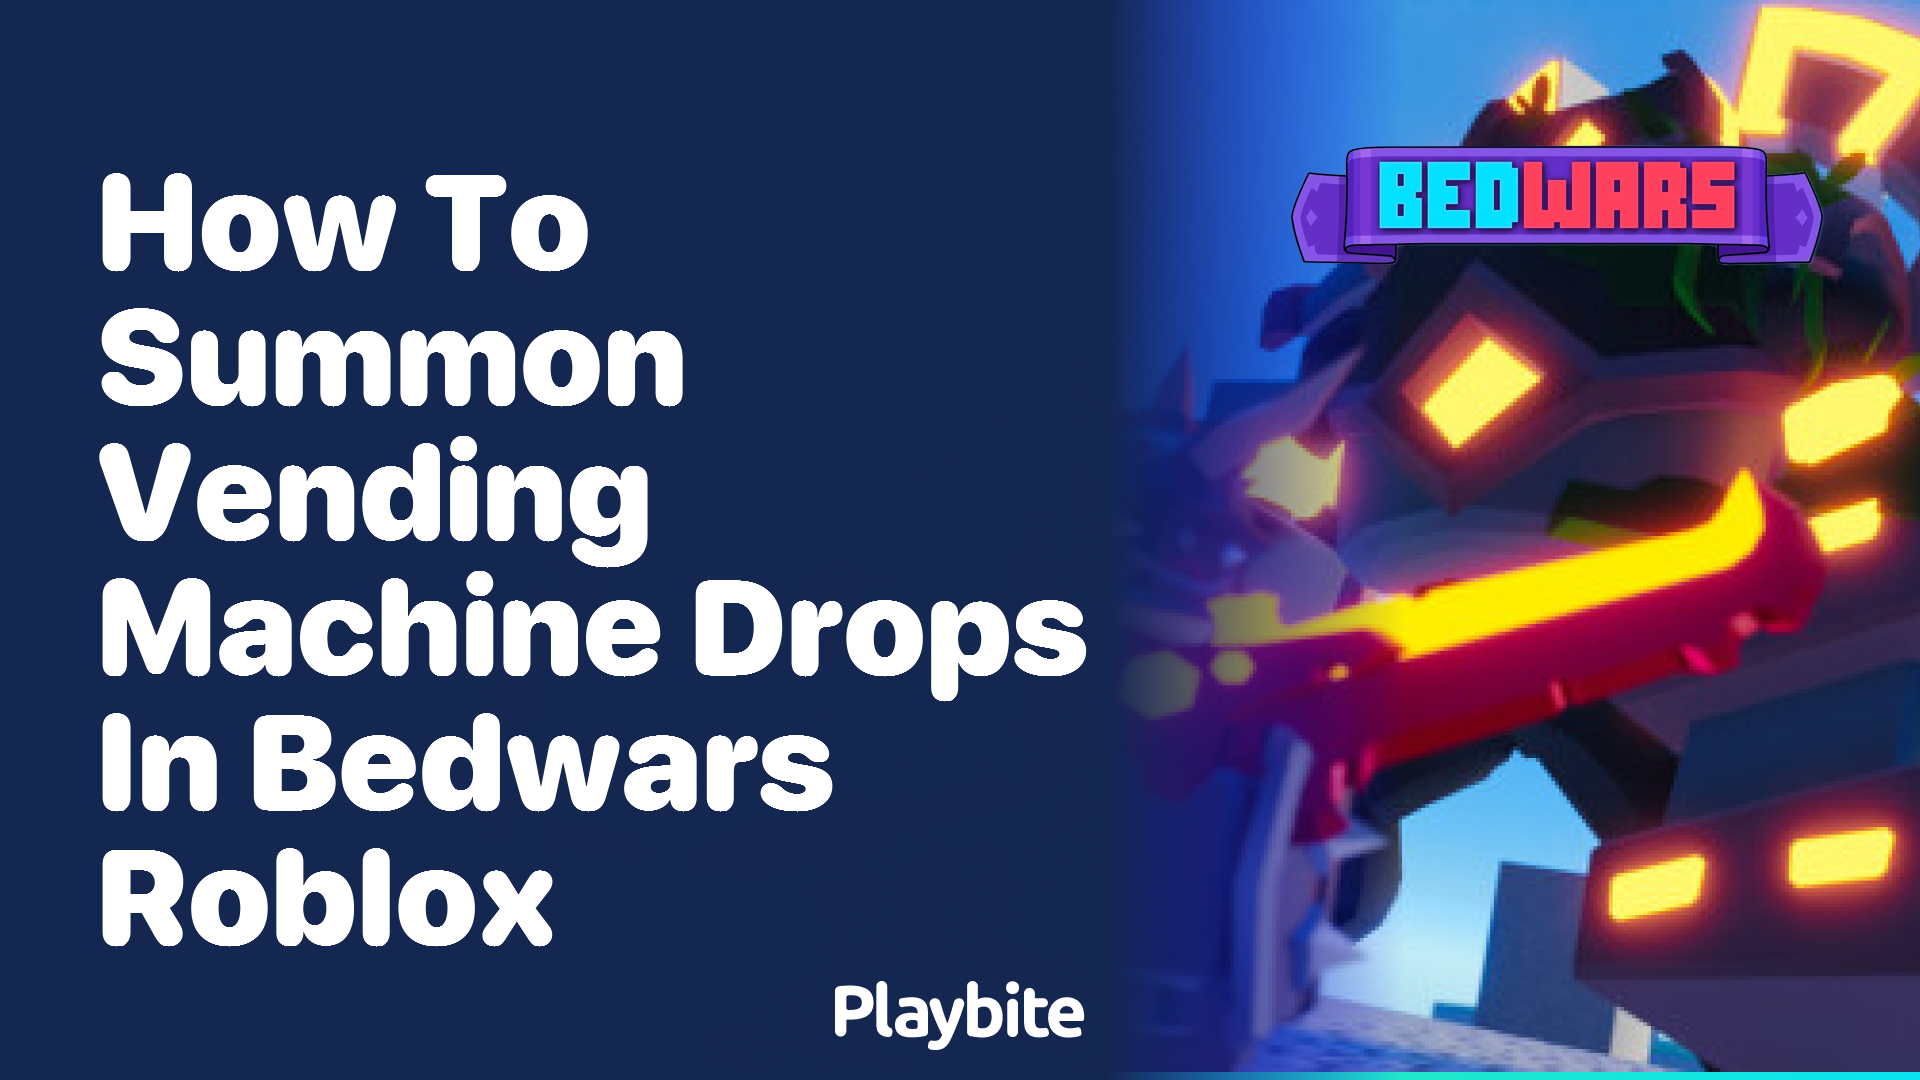 How to Summon Vending Machine Drops in Bedwars Roblox